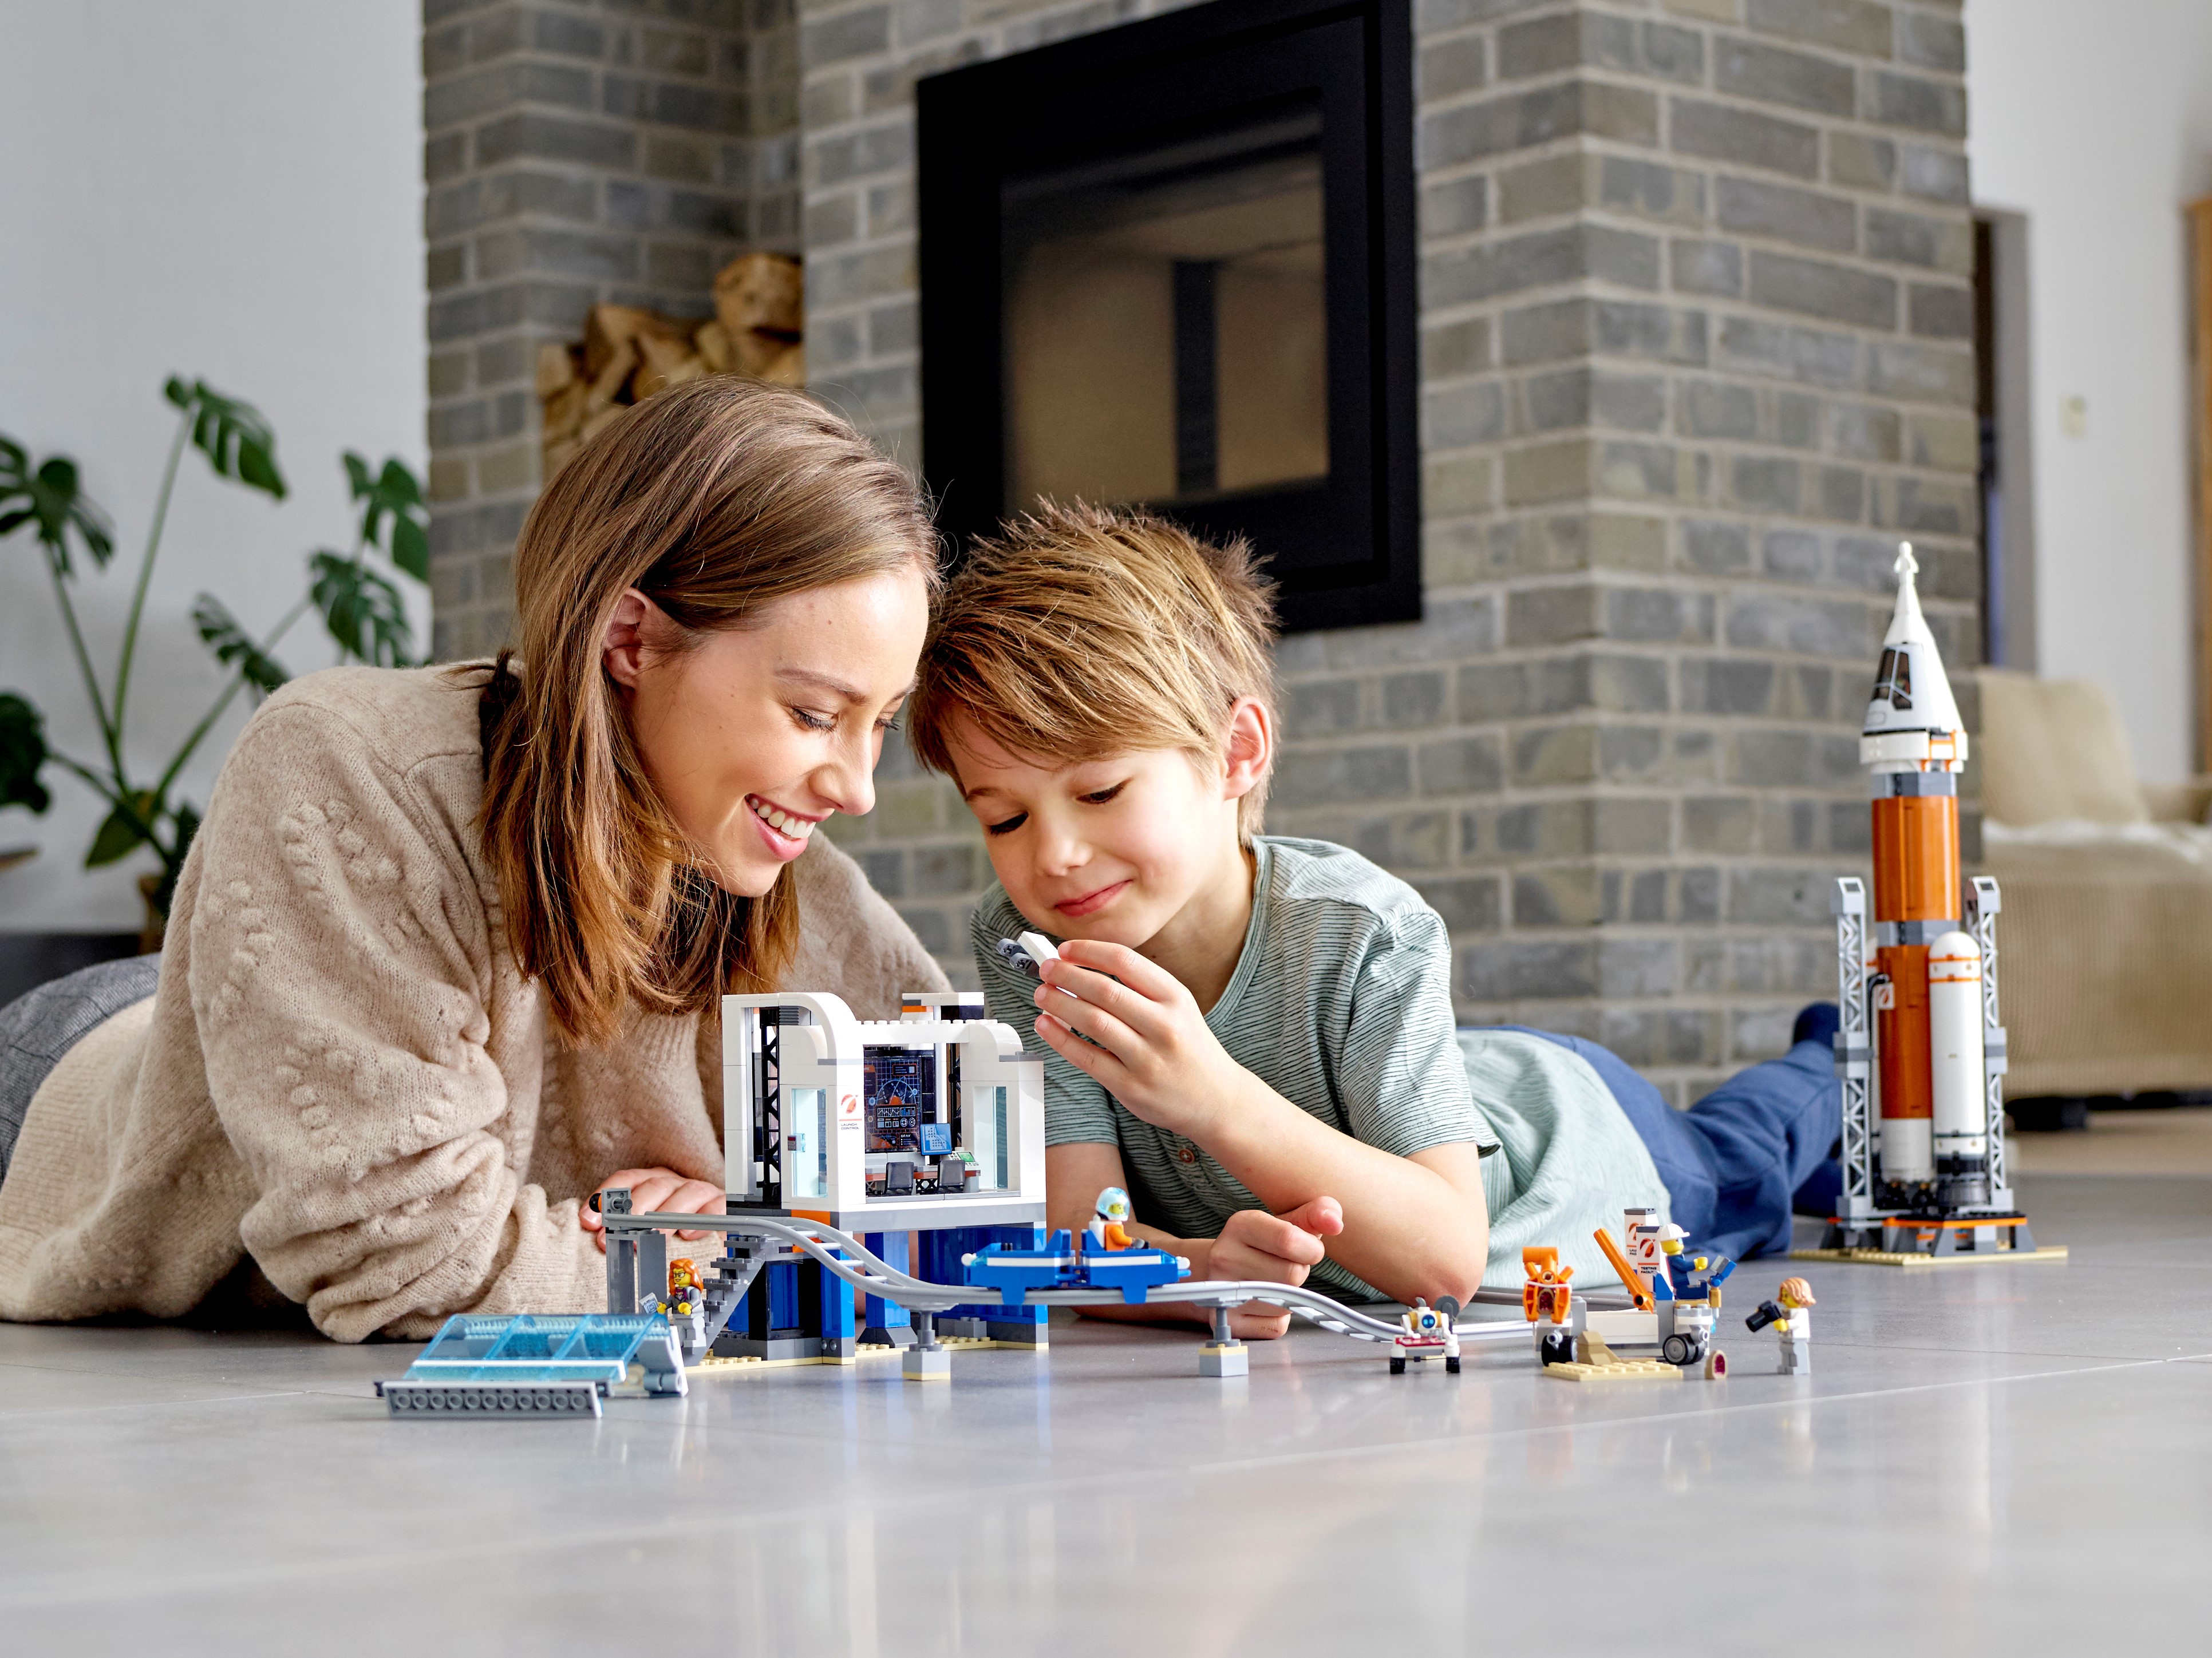 Deep Rocket and Launch Control 60228 | Buy online at the LEGO® Shop US